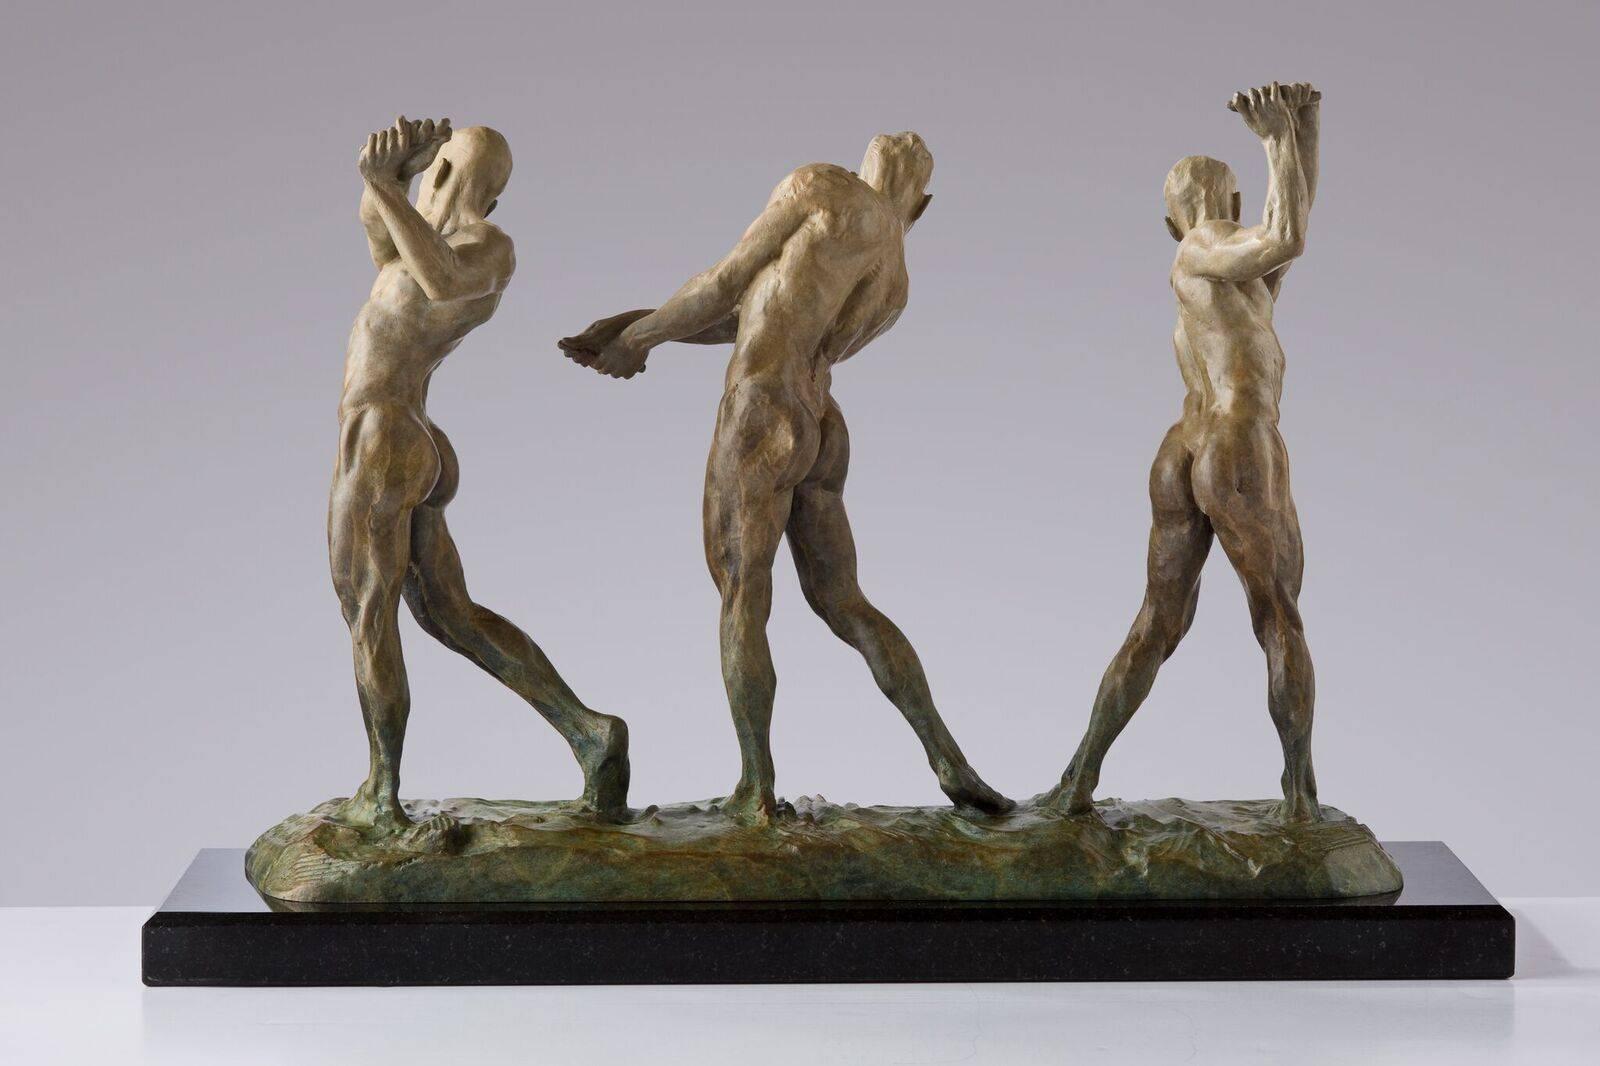 Anatomy of Golf, I, IV and V, Atelier - Sculpture by Richard MacDonald